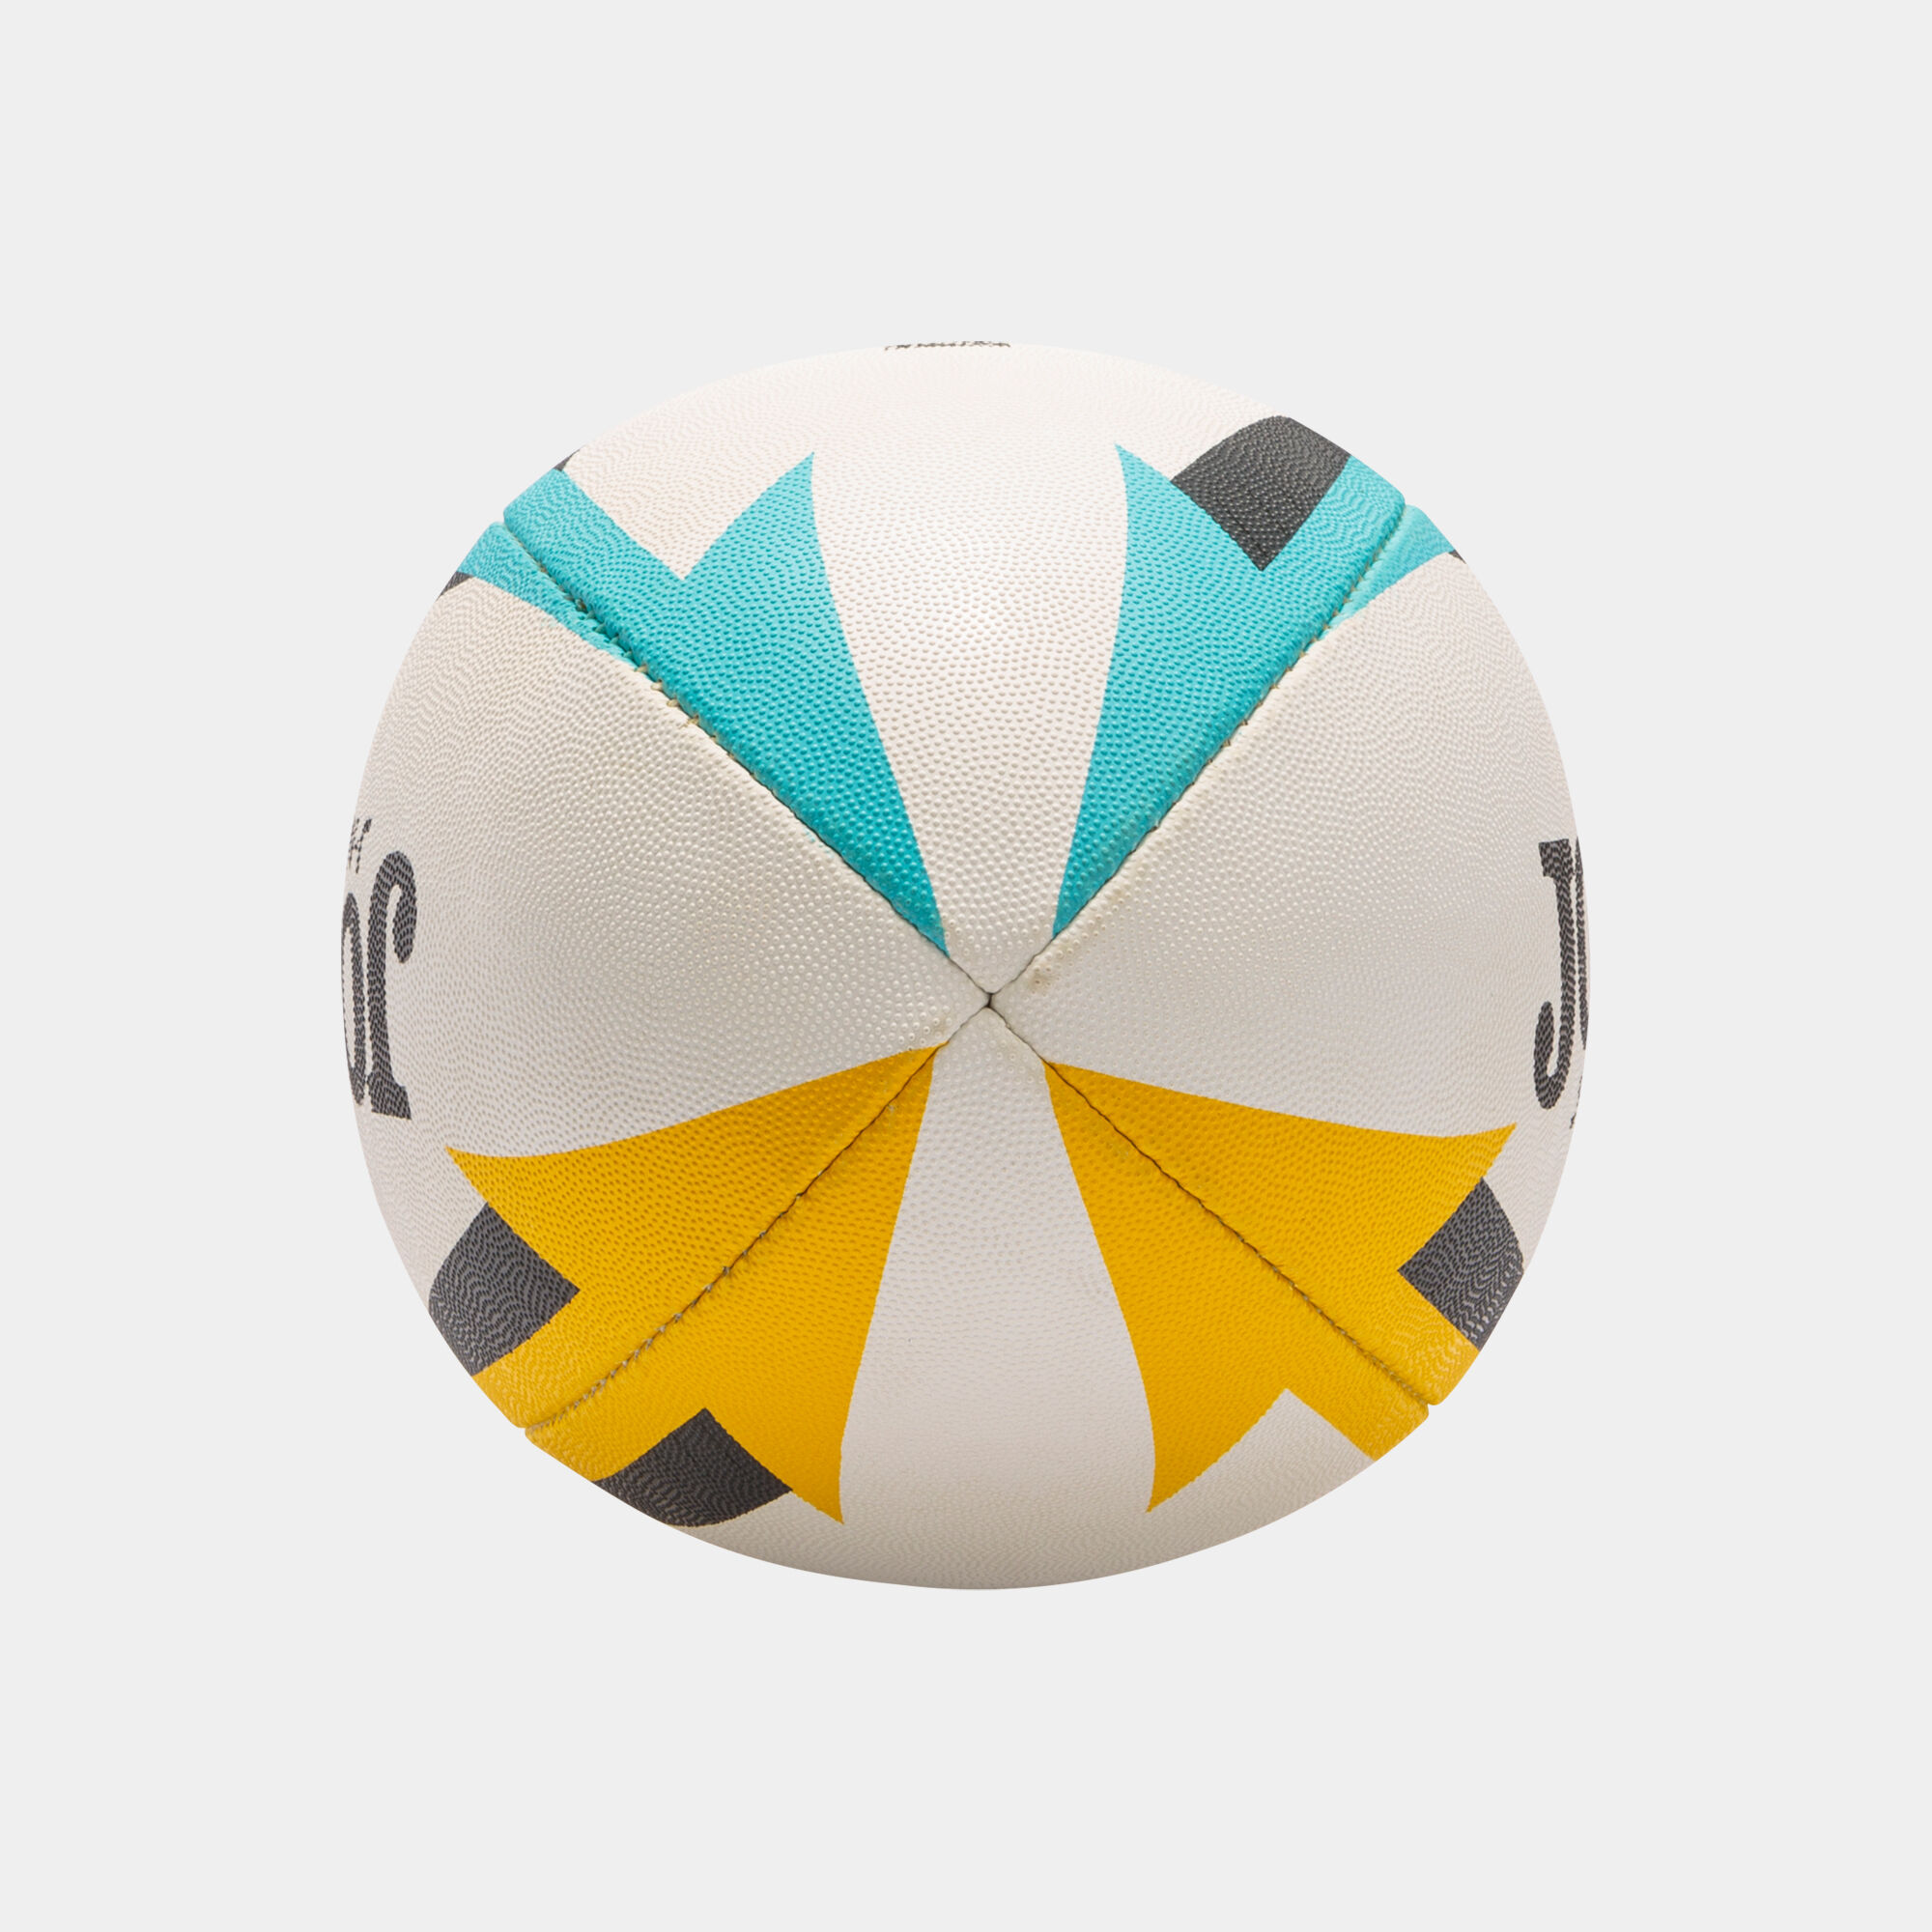 RUGBY BALL J-MAX WHITE YELLOW BLUE